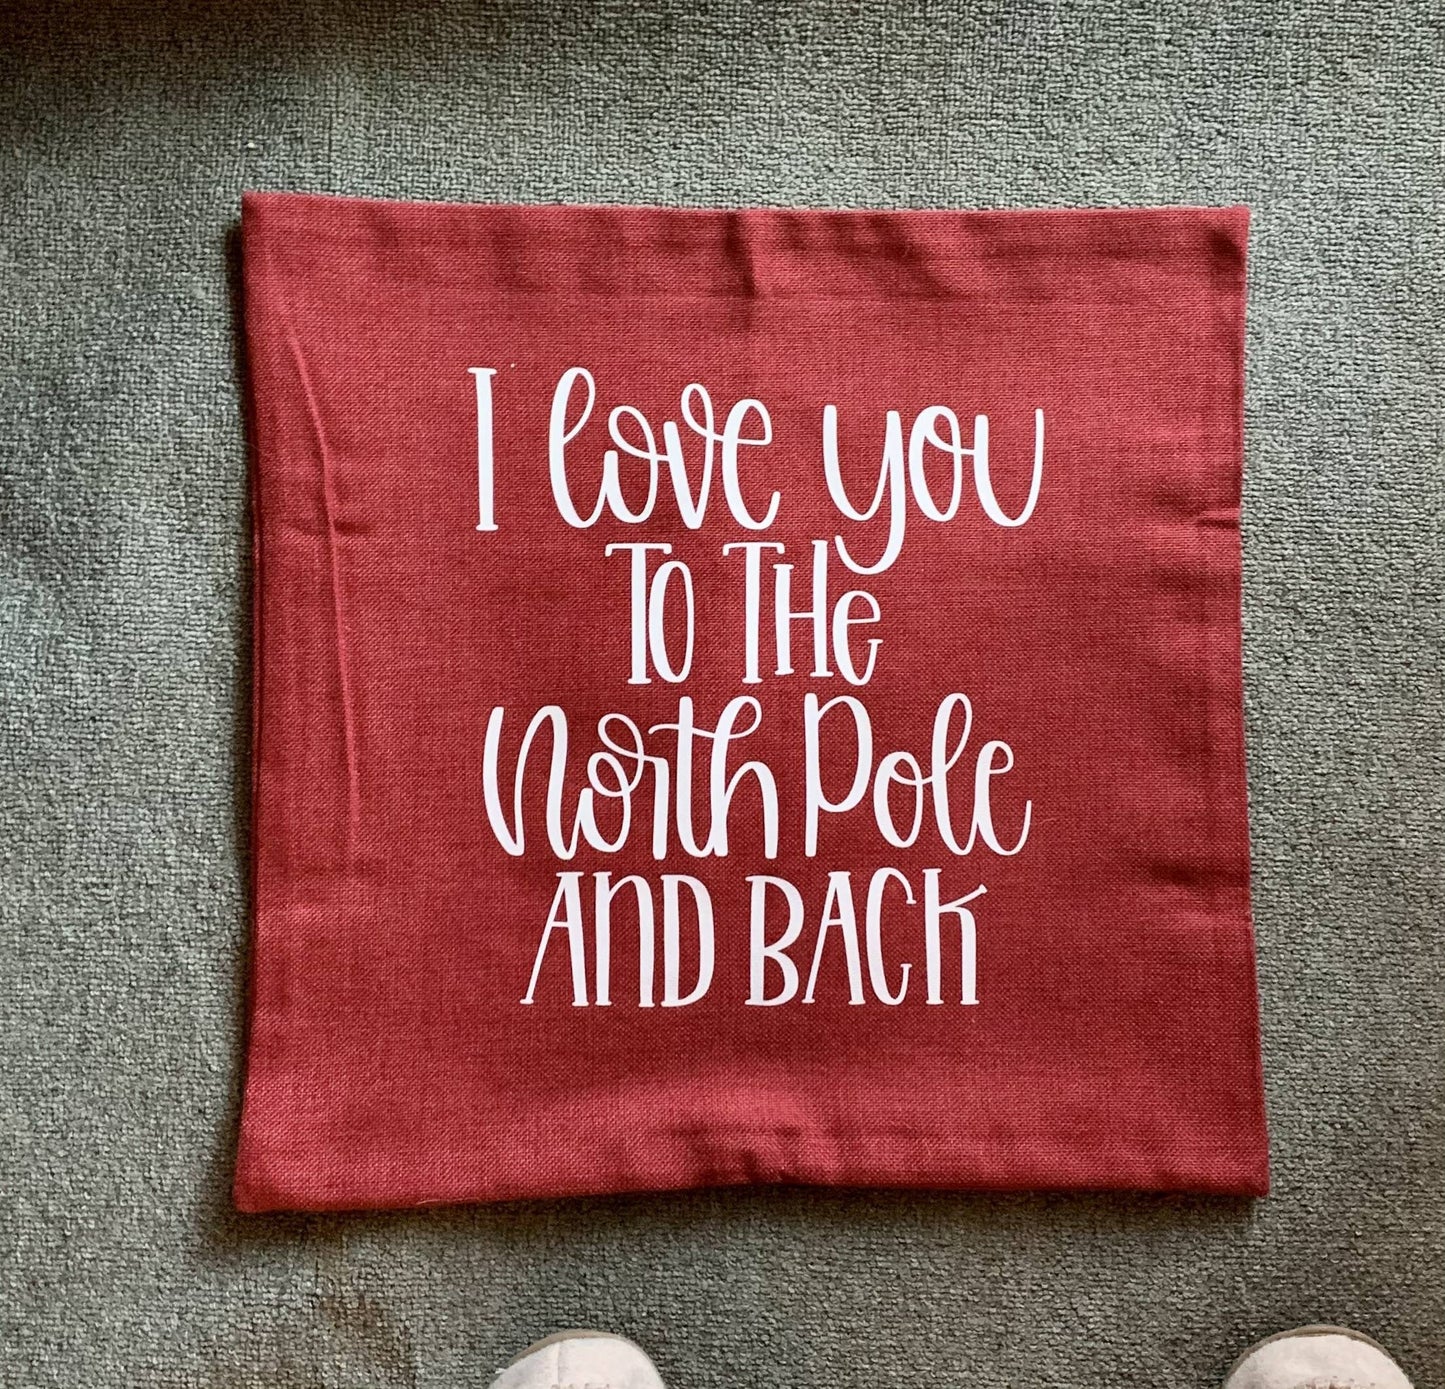 18x18" I Love You To The North Pole And Back Pillow Cover - Burgundy